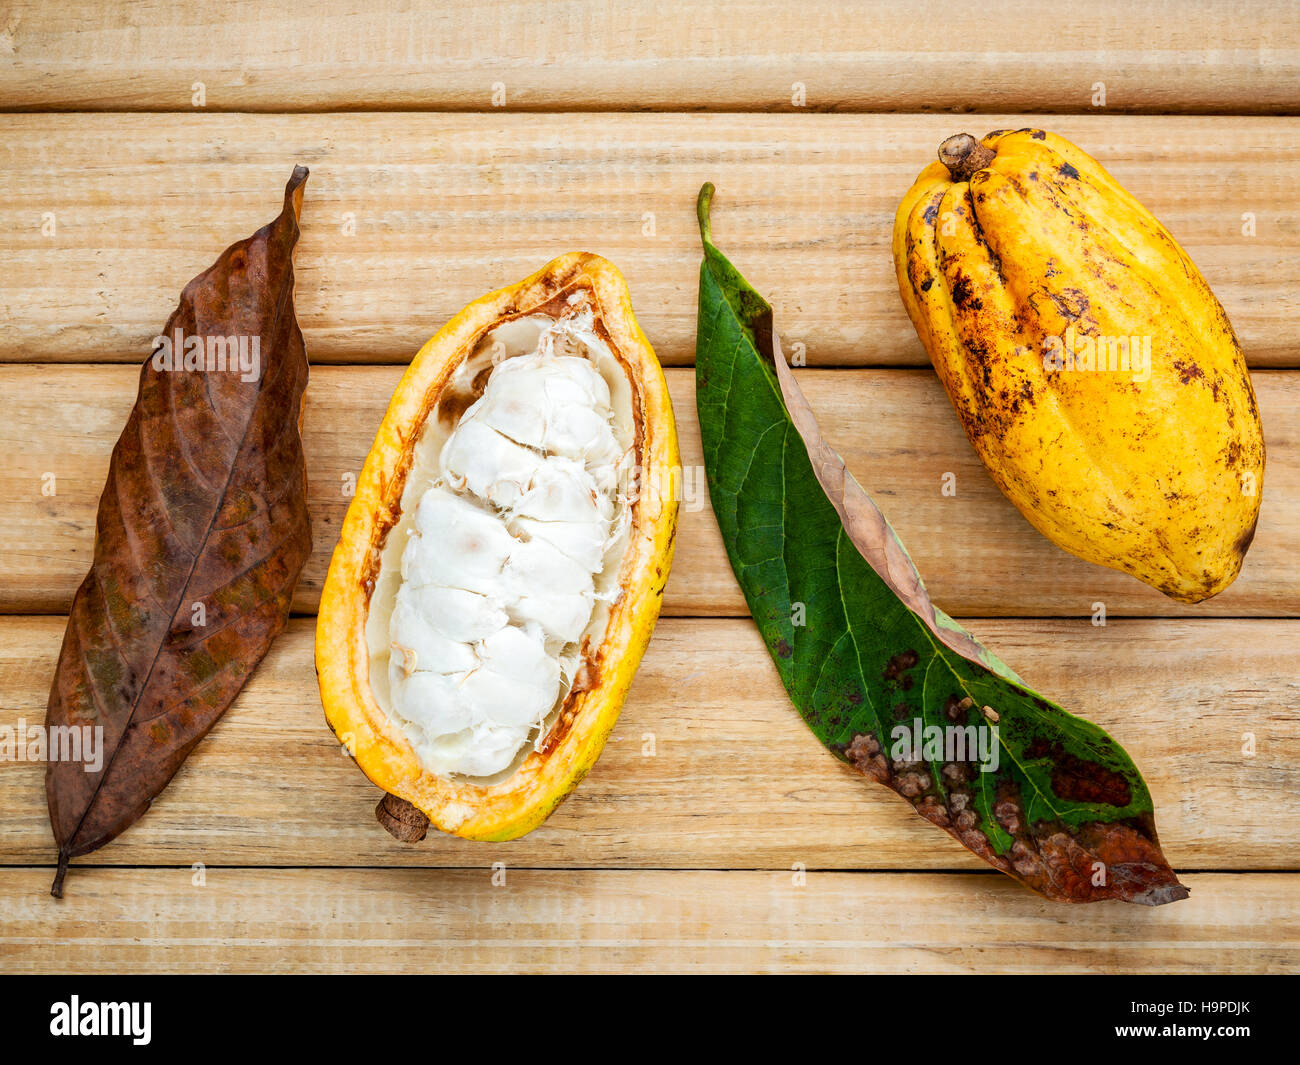 Ripe Indonesia cocoa and cocoa leaves setup on rustic wooden bac Stock Photo